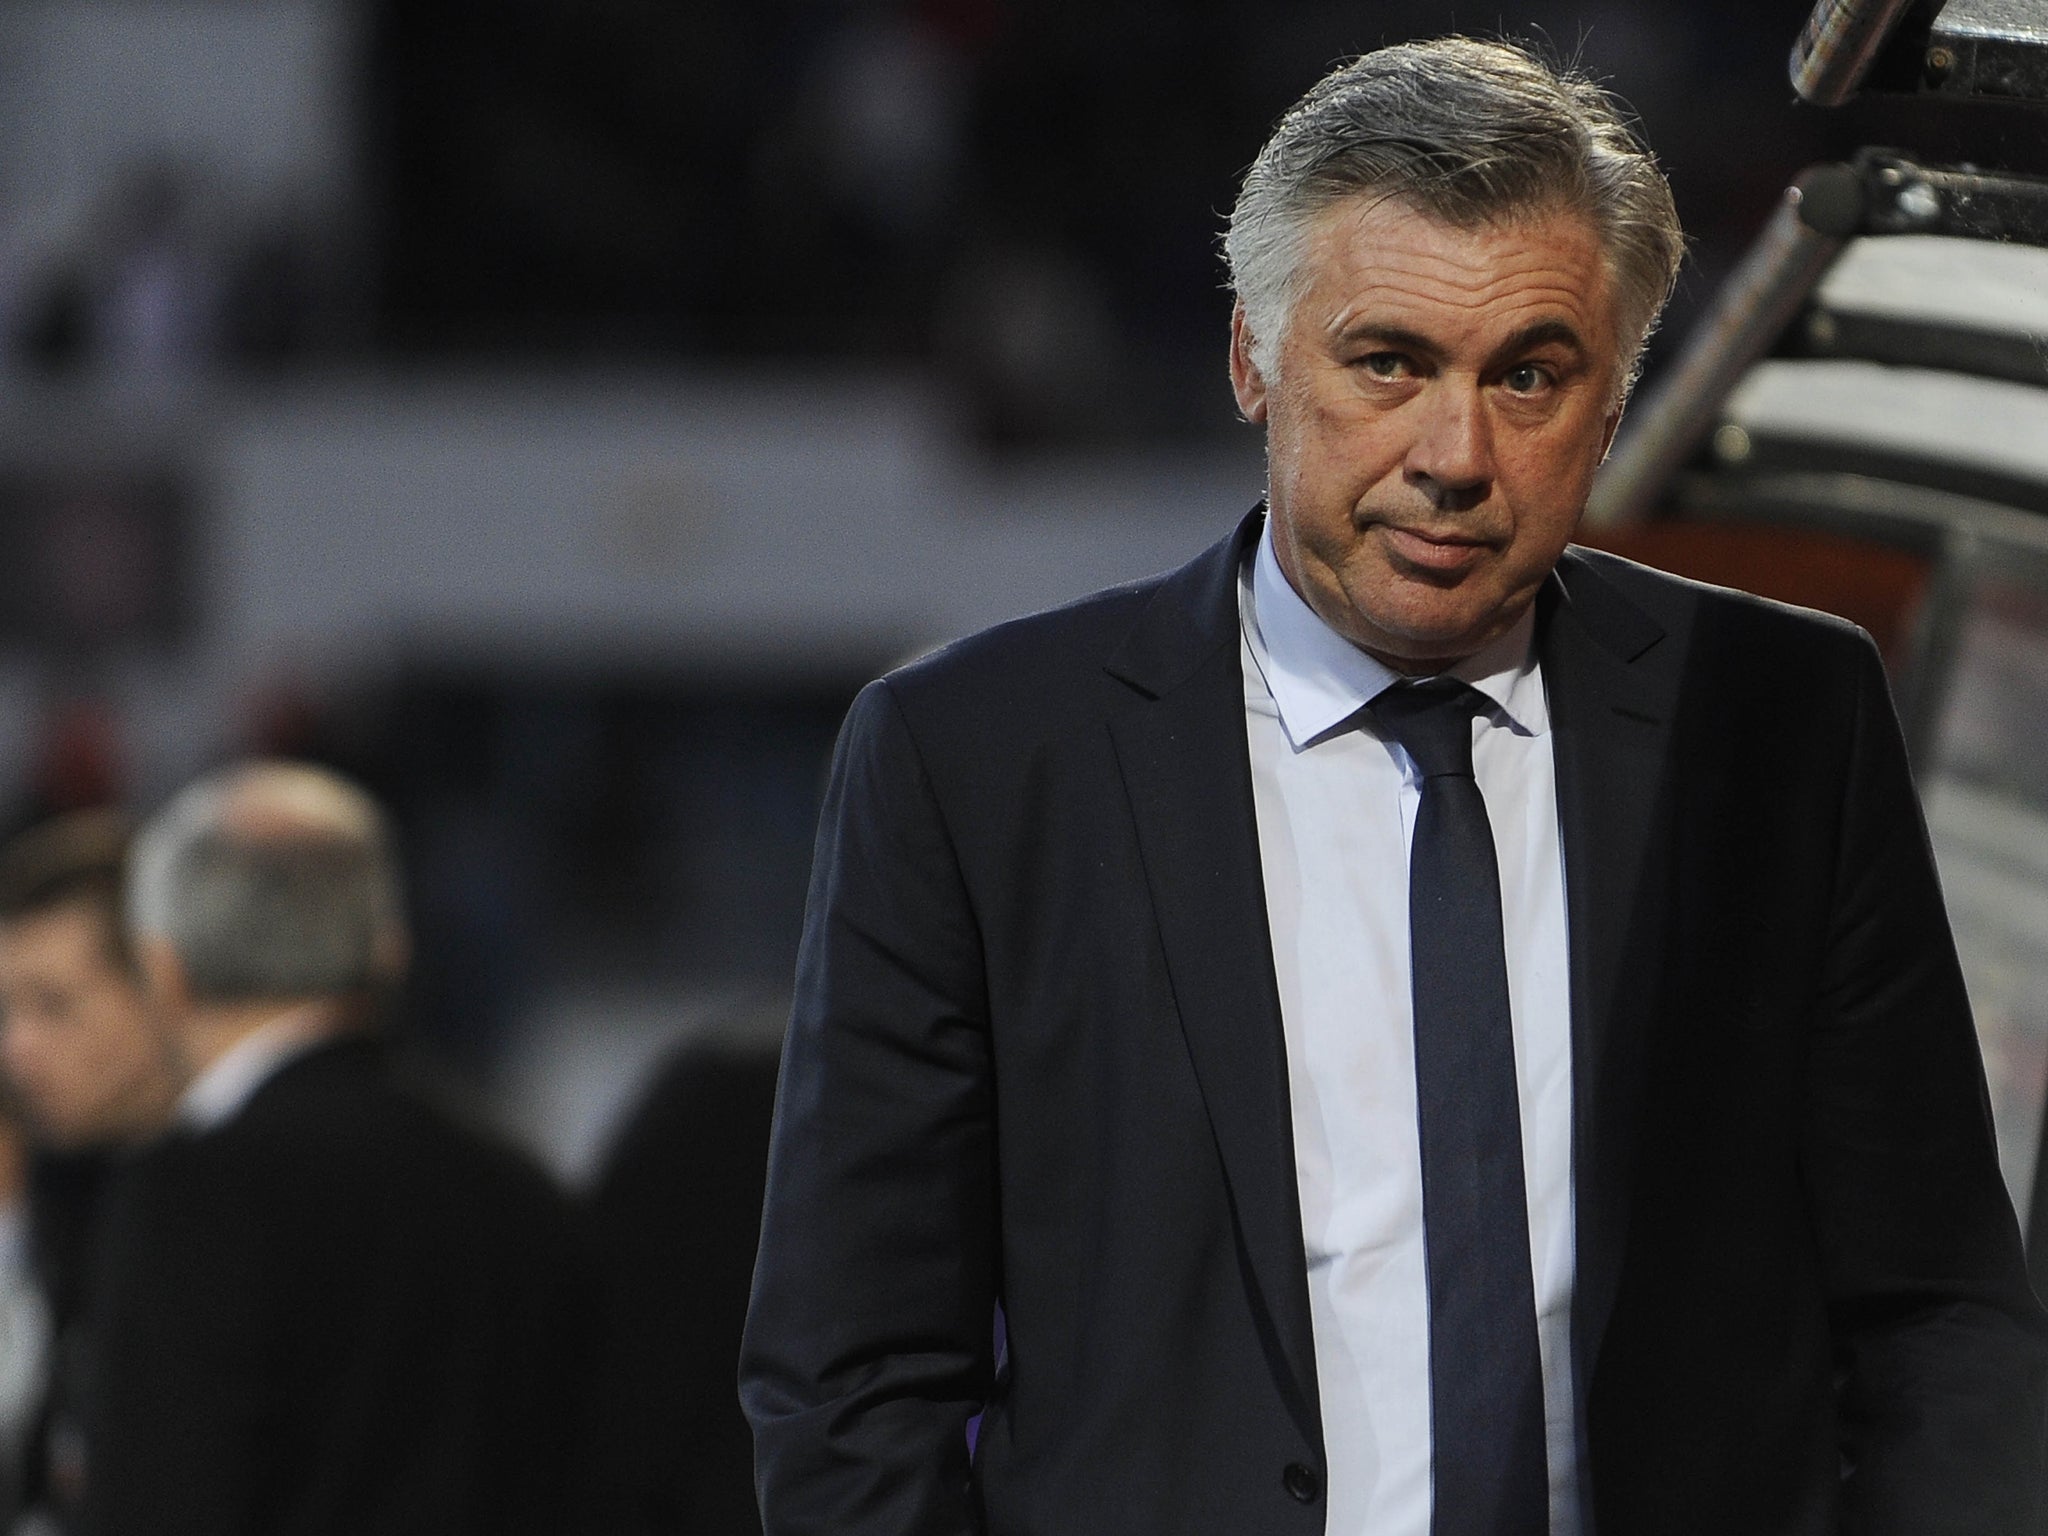 New Real Madrid manager Carlo Ancelotti has spoken of his recent appointment